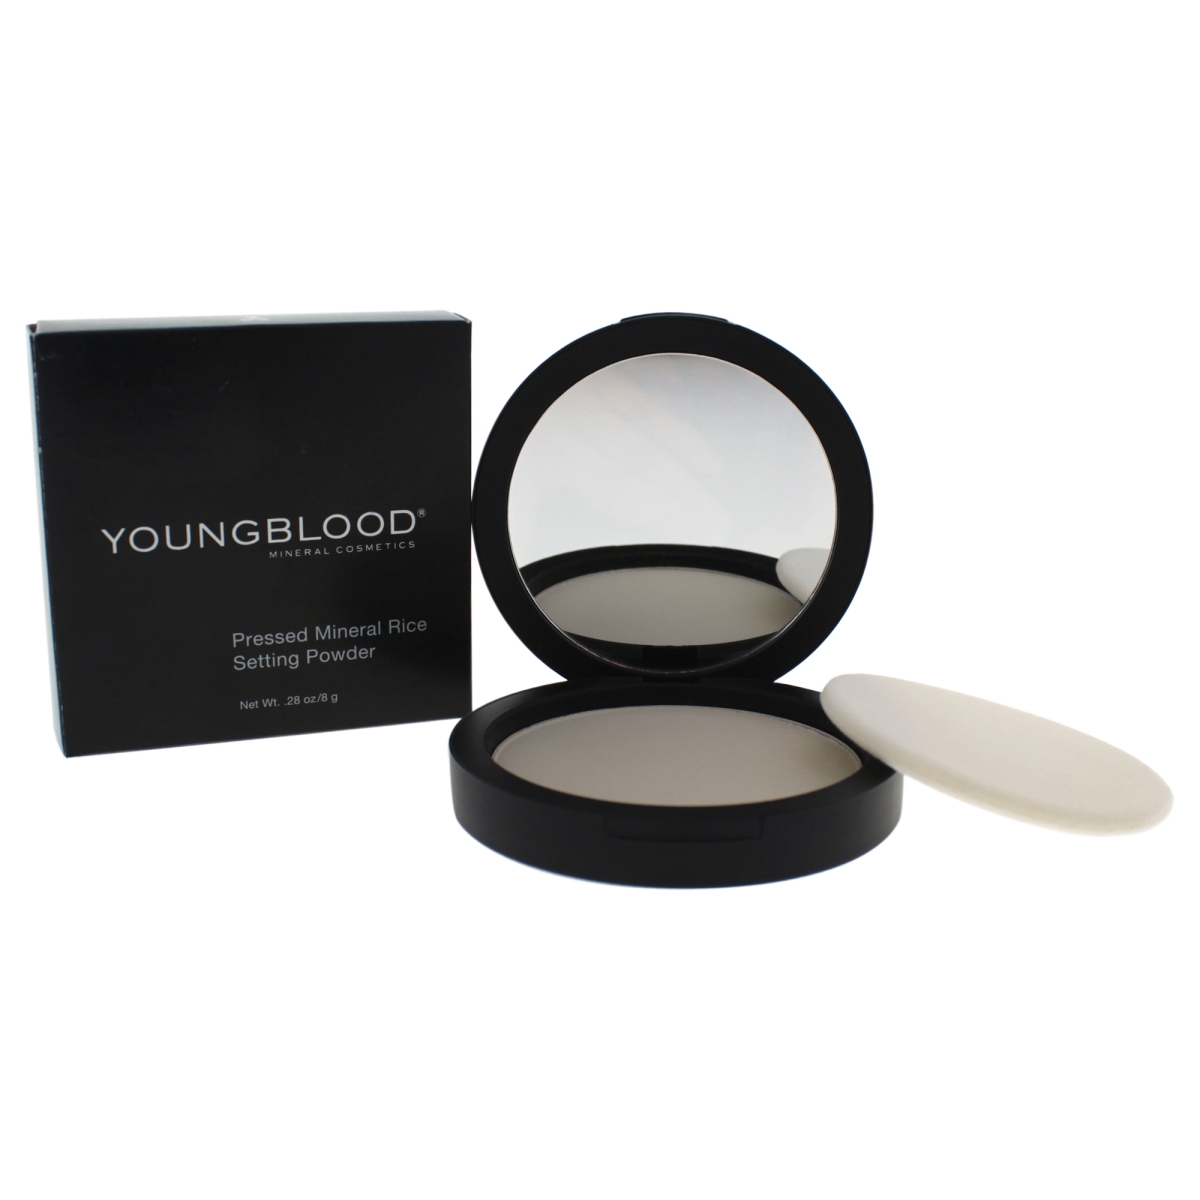 Picture of Youngblood W-C-12031 Pressed Mineral Rice Setting Powder - Light for Women - 0.28 oz